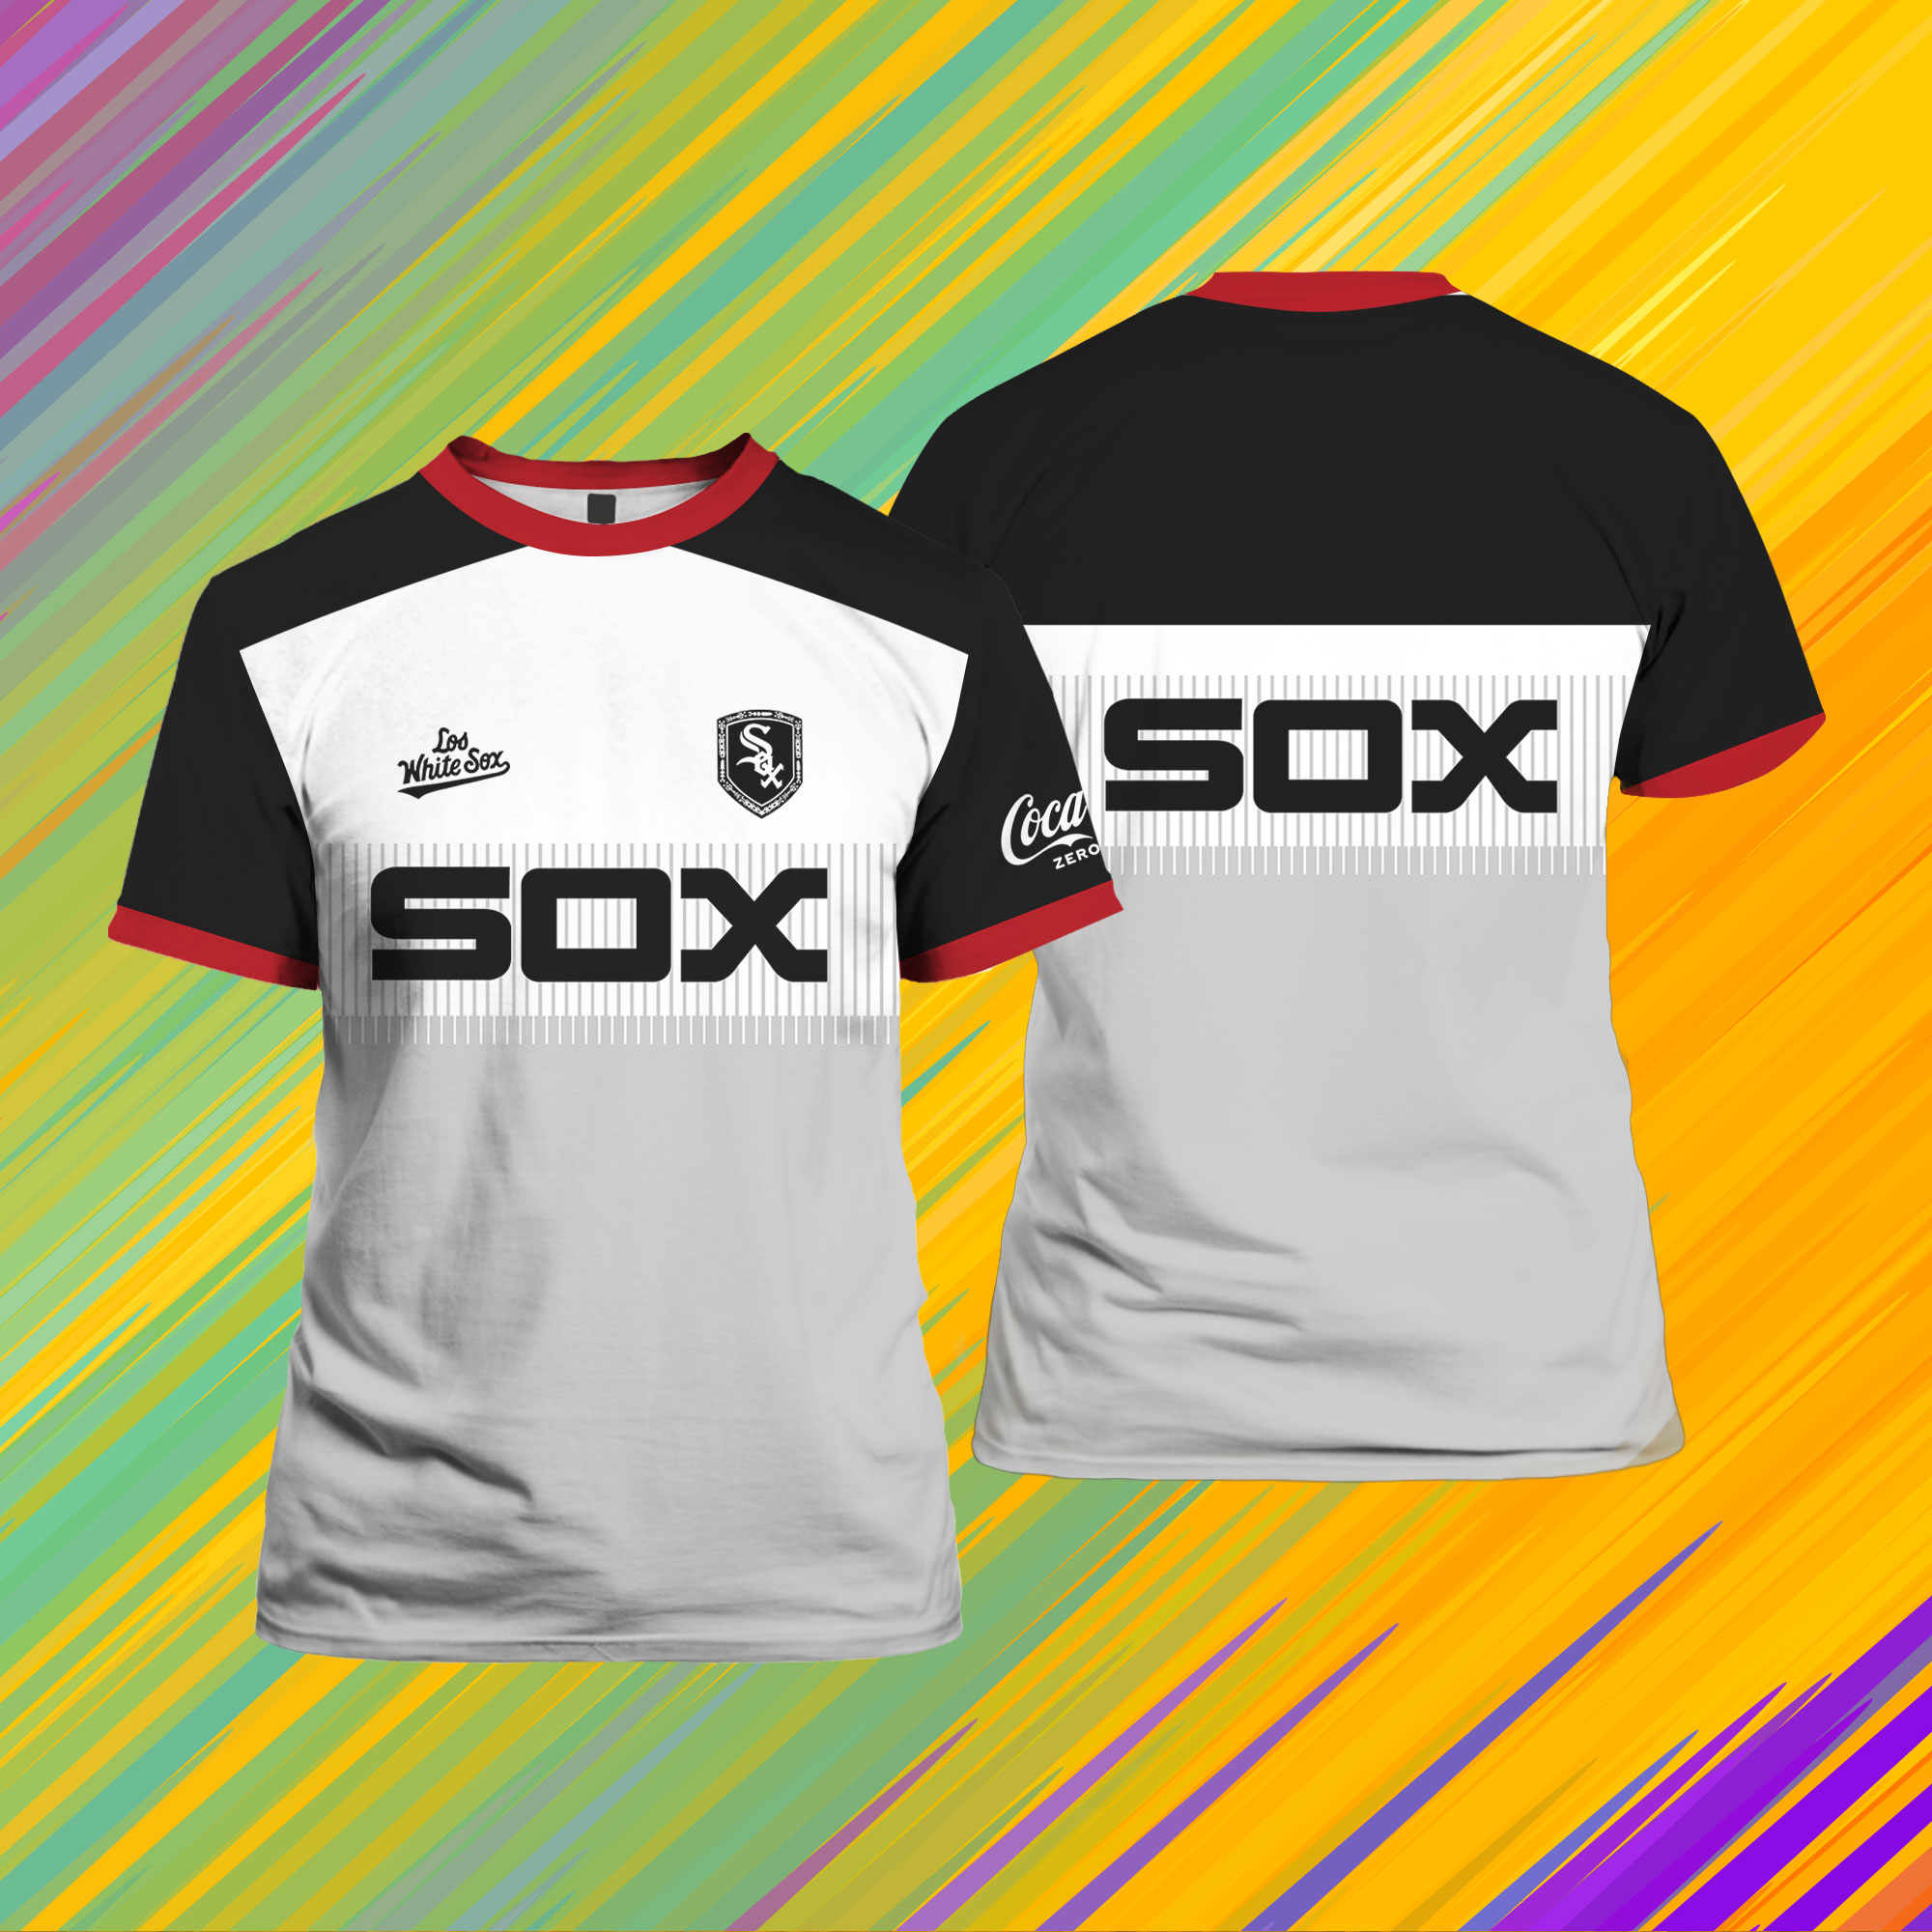 los white sox soccer jersey 2022